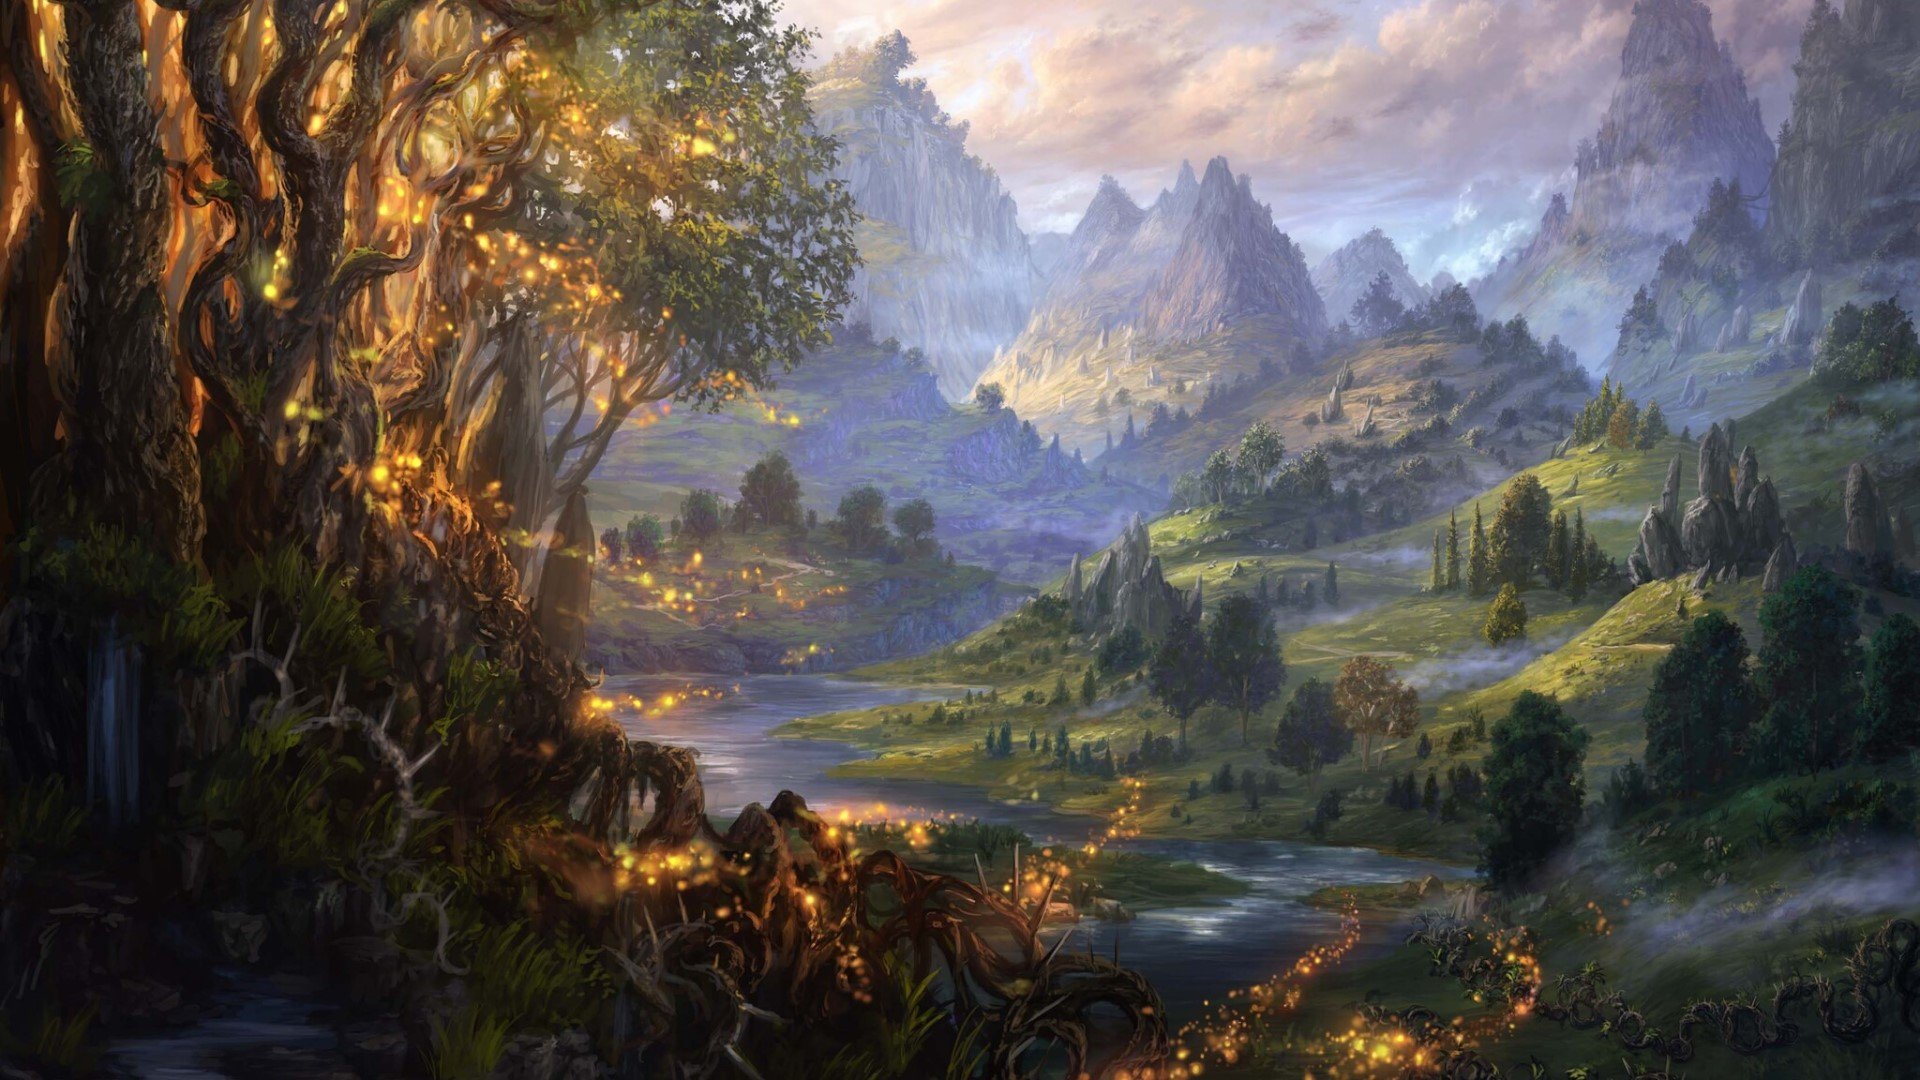 MTG release schedule 2023 - Wizards of the Coast art of an idyllic fairytale landscape - with thorns growing magically, glowing gold, encroaching from the forest.